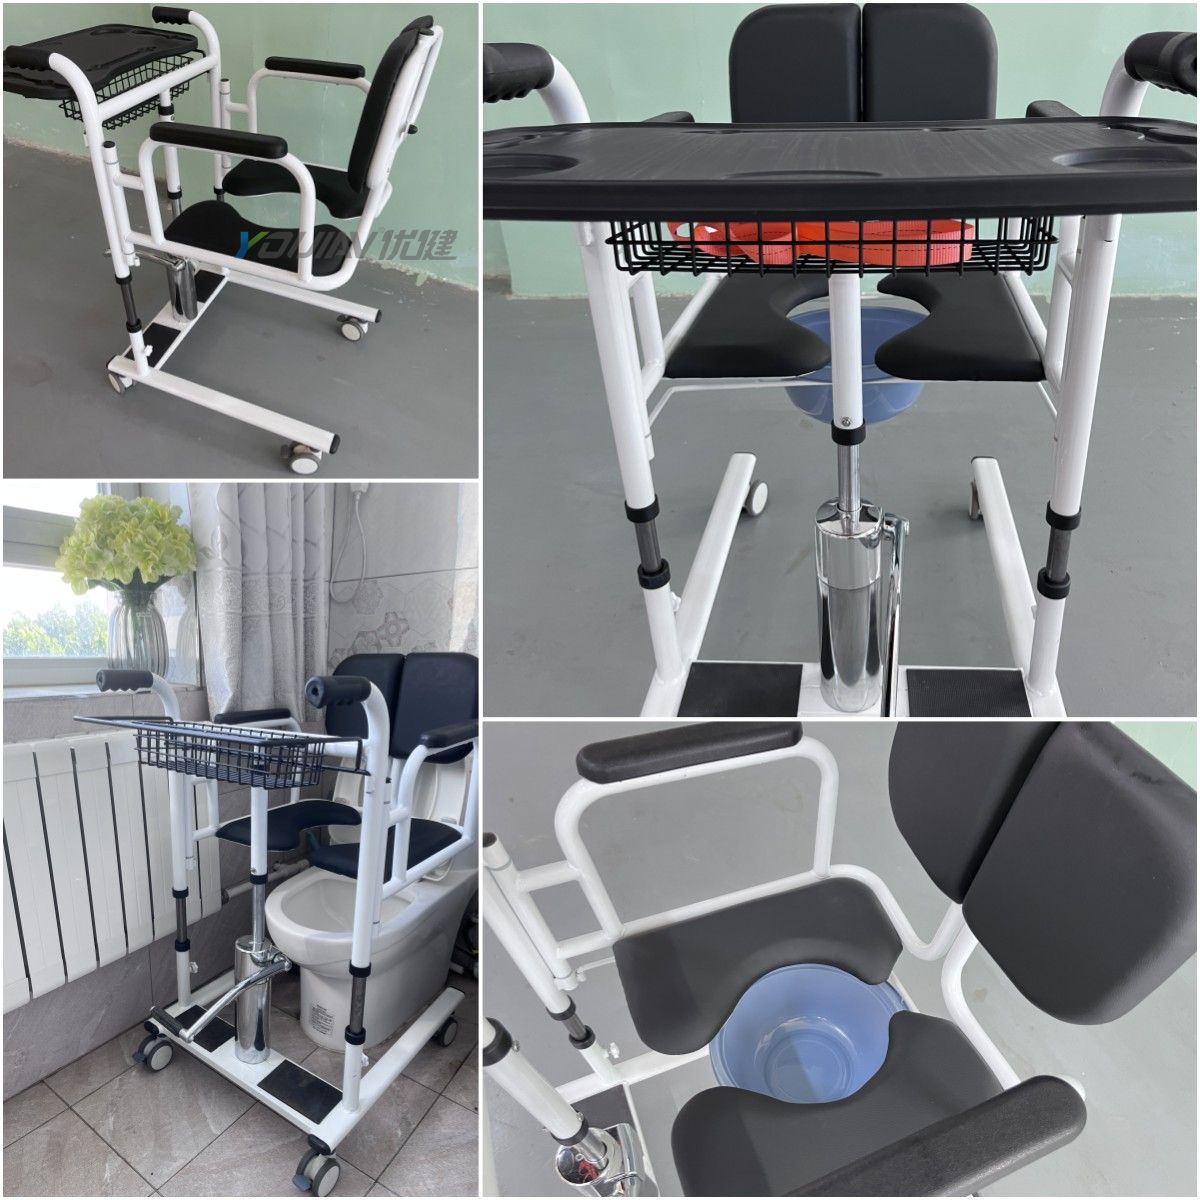 Transfer Lift Chair, Commode Transport Chair